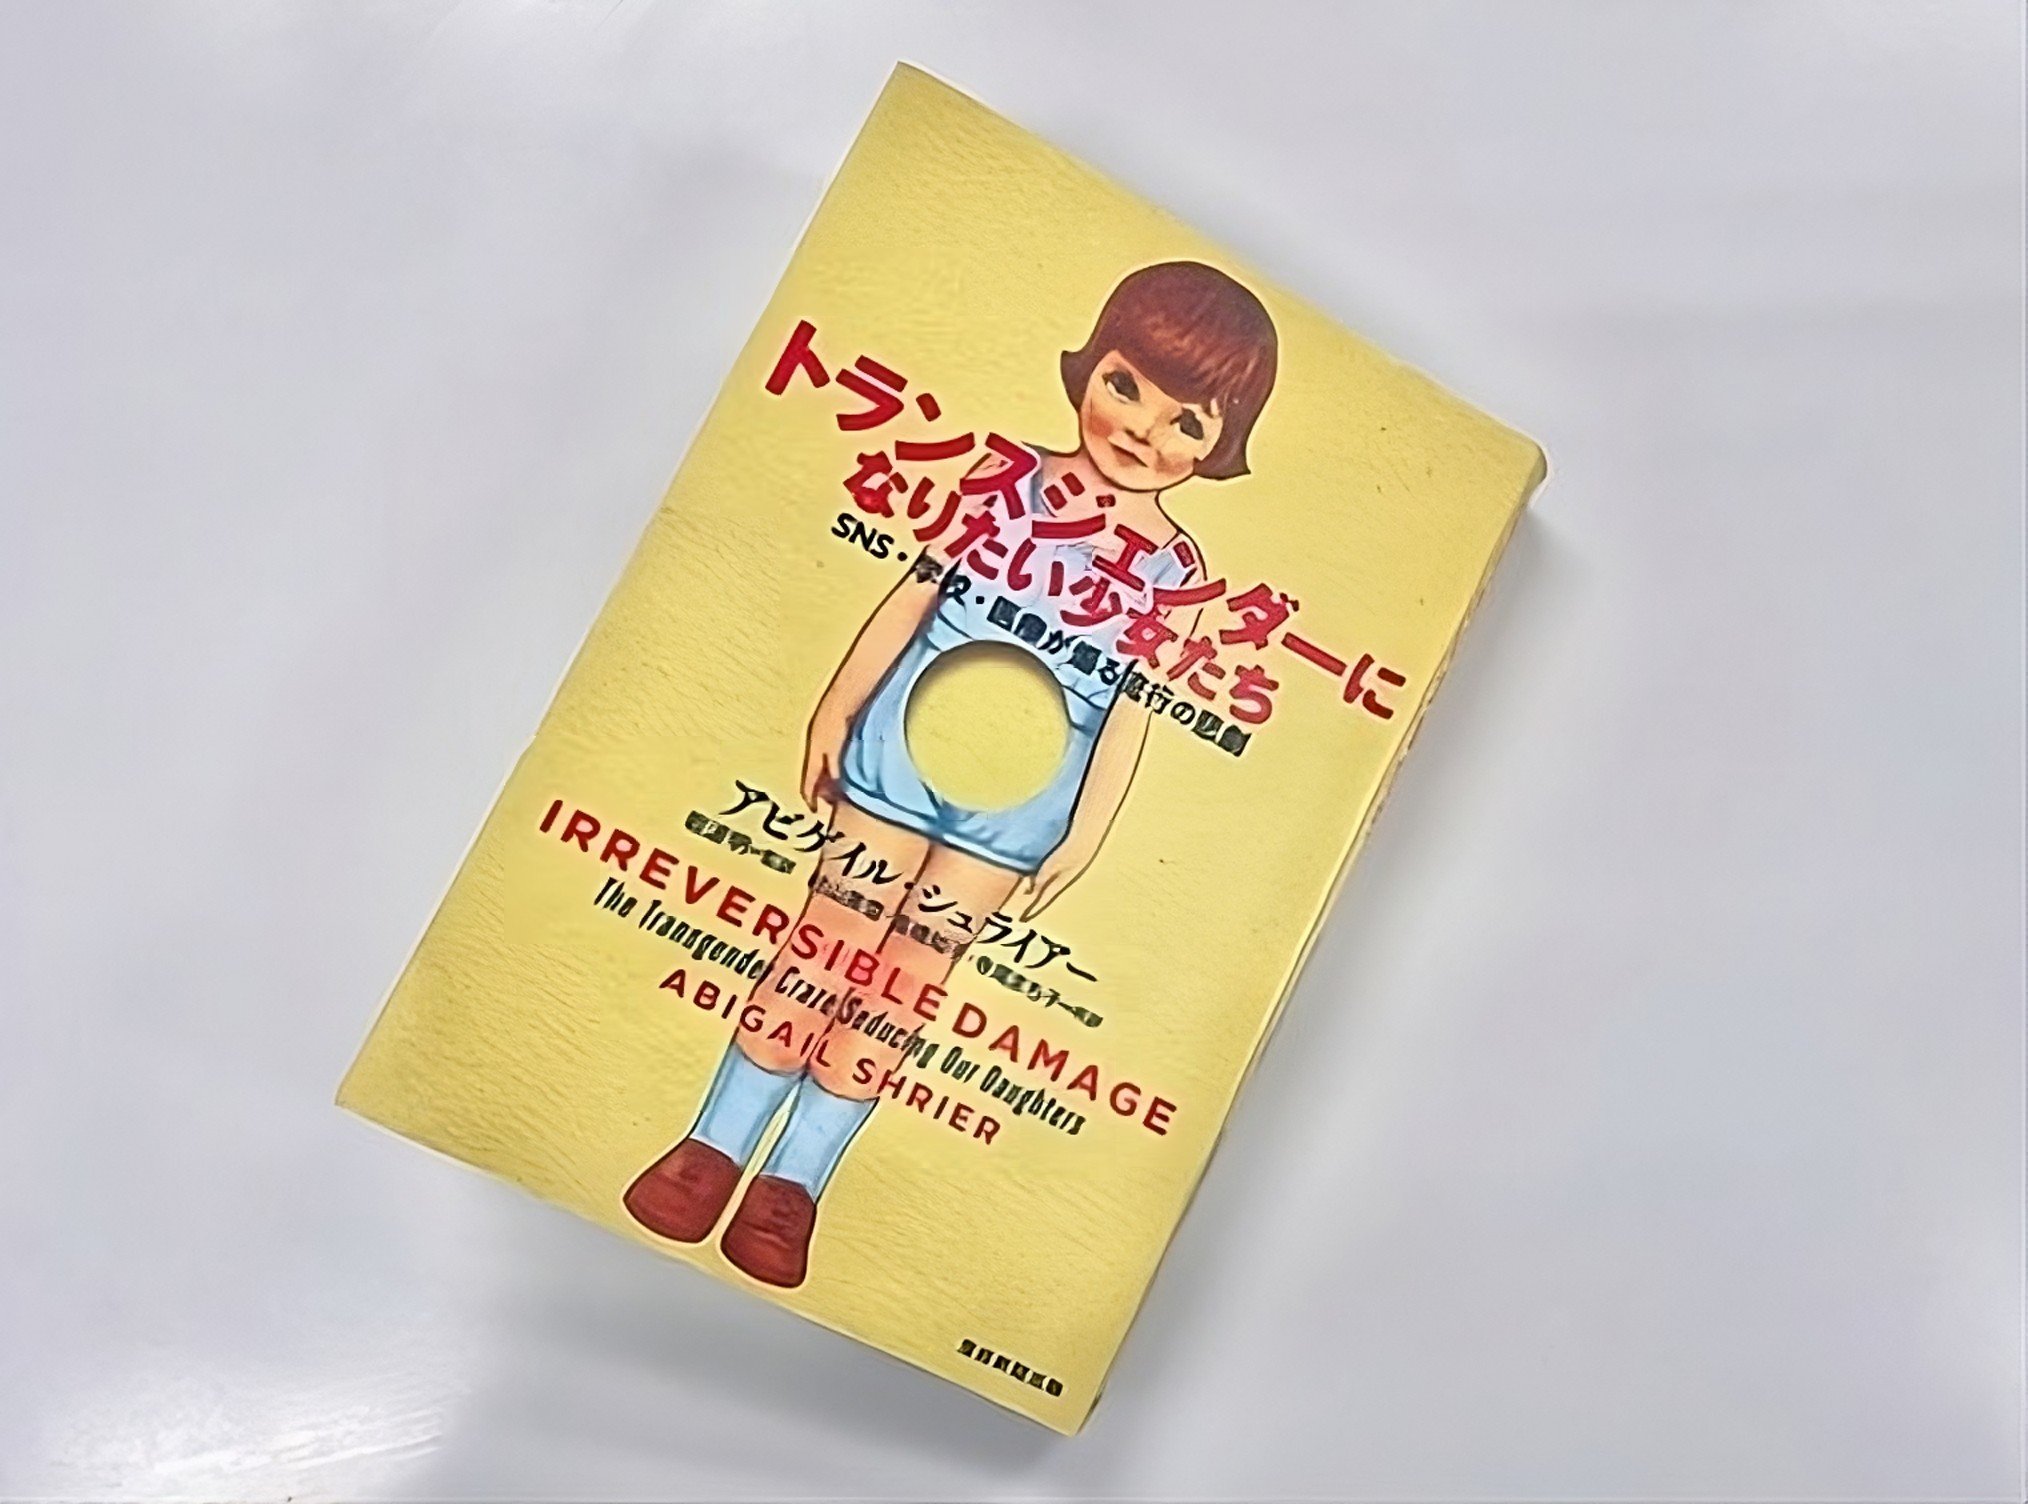 The cover of the Japanese edition of Abigail Shrier’s book, “Irreversible Damage: The Transgender Craze Seducing Our Daughters”, published by Sankei Shimbun Publishing. Photo: X/vocgensan